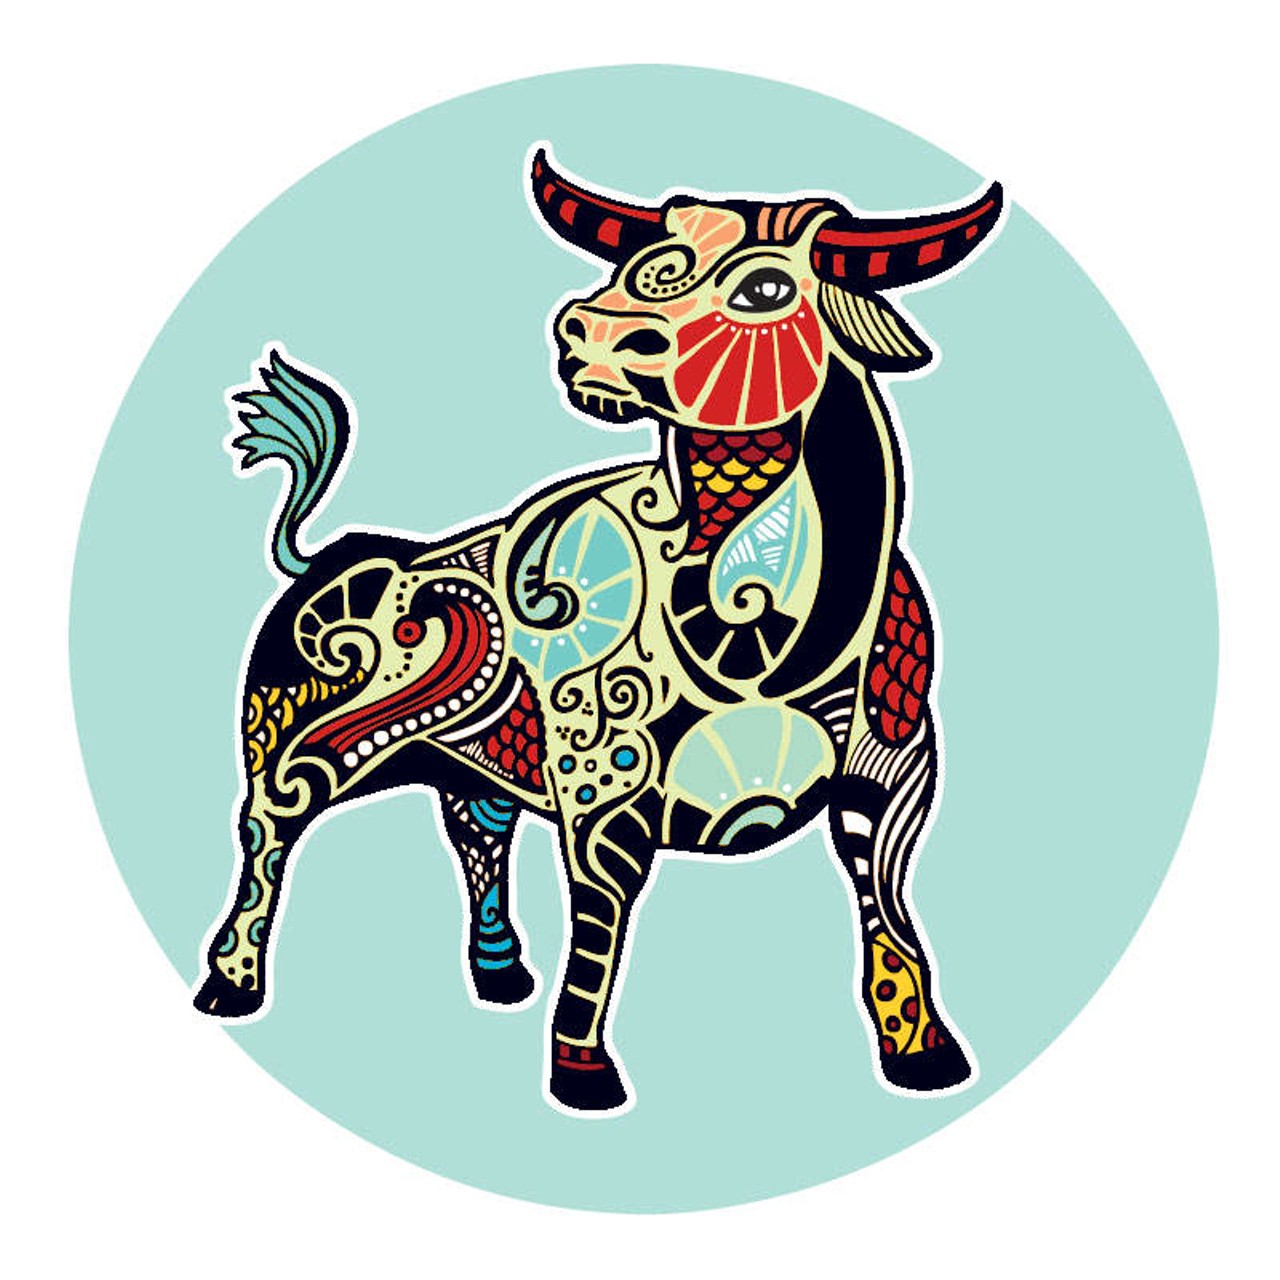 TAURUS (April 21 -May 20): 
Playing both ends to the middle is what&#146;s going on. Sooner or later you&#146;re going to have to make a choice. Others are freaking out about the fact that they don&#146;t know where you&#146;re coming from, and you are so wrapped up in who you think you are, you stopped looking at the reality of your situation about a year ago. Now that it&#146;s time to face things you&#146;ve got to get down to the bone and stop over-dramatizing them. Life is pretty simple when you come right down to it, but the truth can be a hard thing to tell. Once you give it a voice it&#146;ll open the space for you to move on.